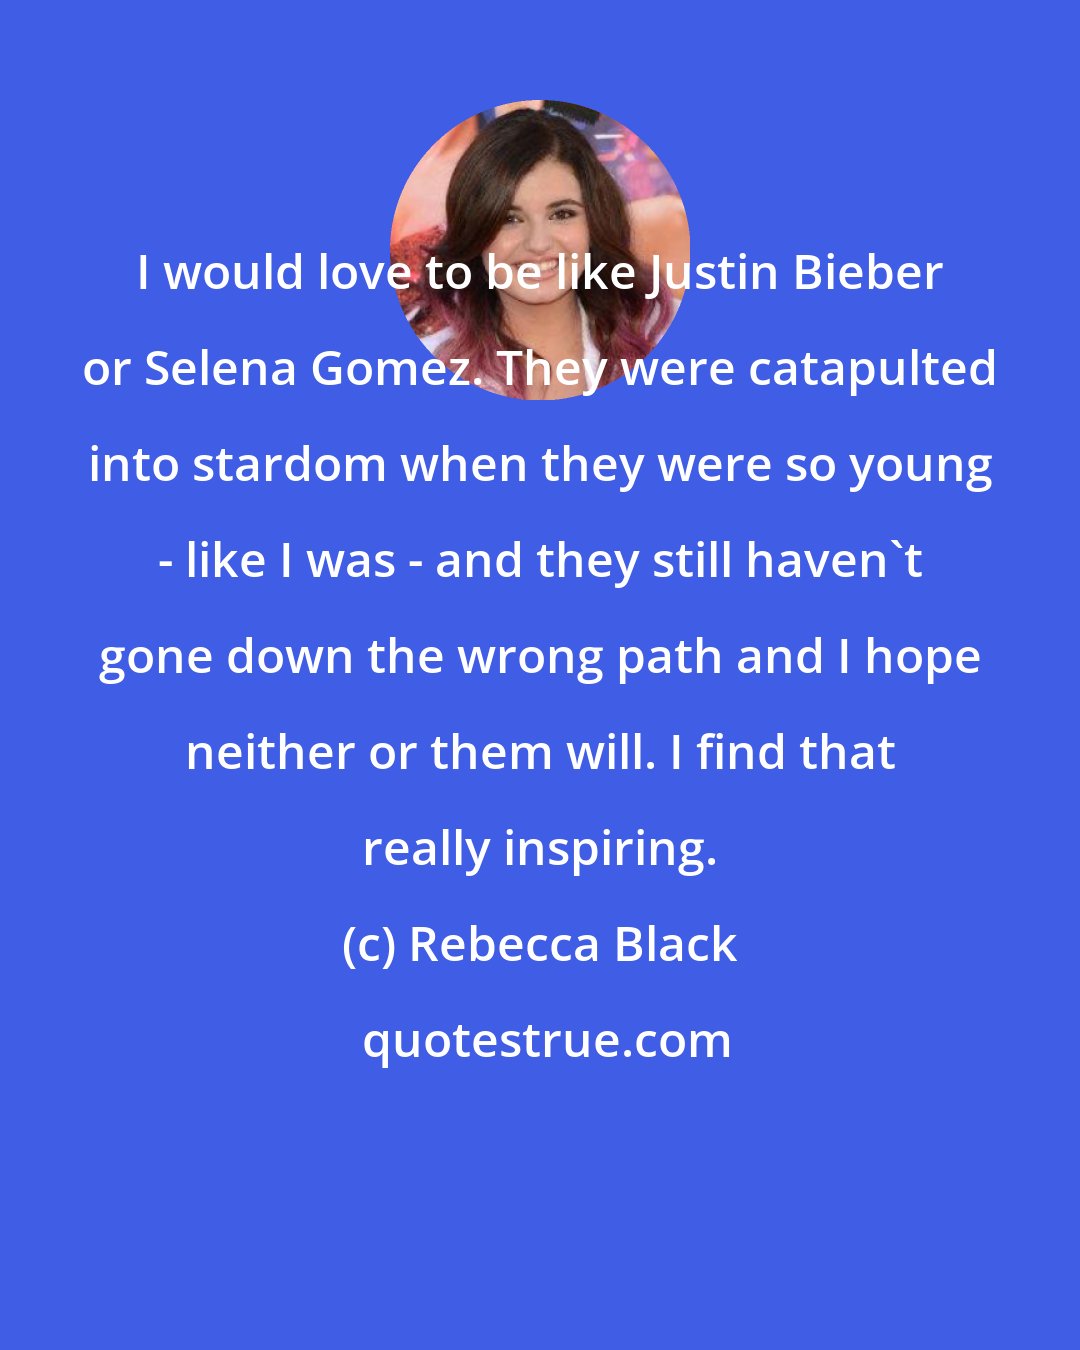 Rebecca Black: I would love to be like Justin Bieber or Selena Gomez. They were catapulted into stardom when they were so young - like I was - and they still haven't gone down the wrong path and I hope neither or them will. I find that really inspiring.